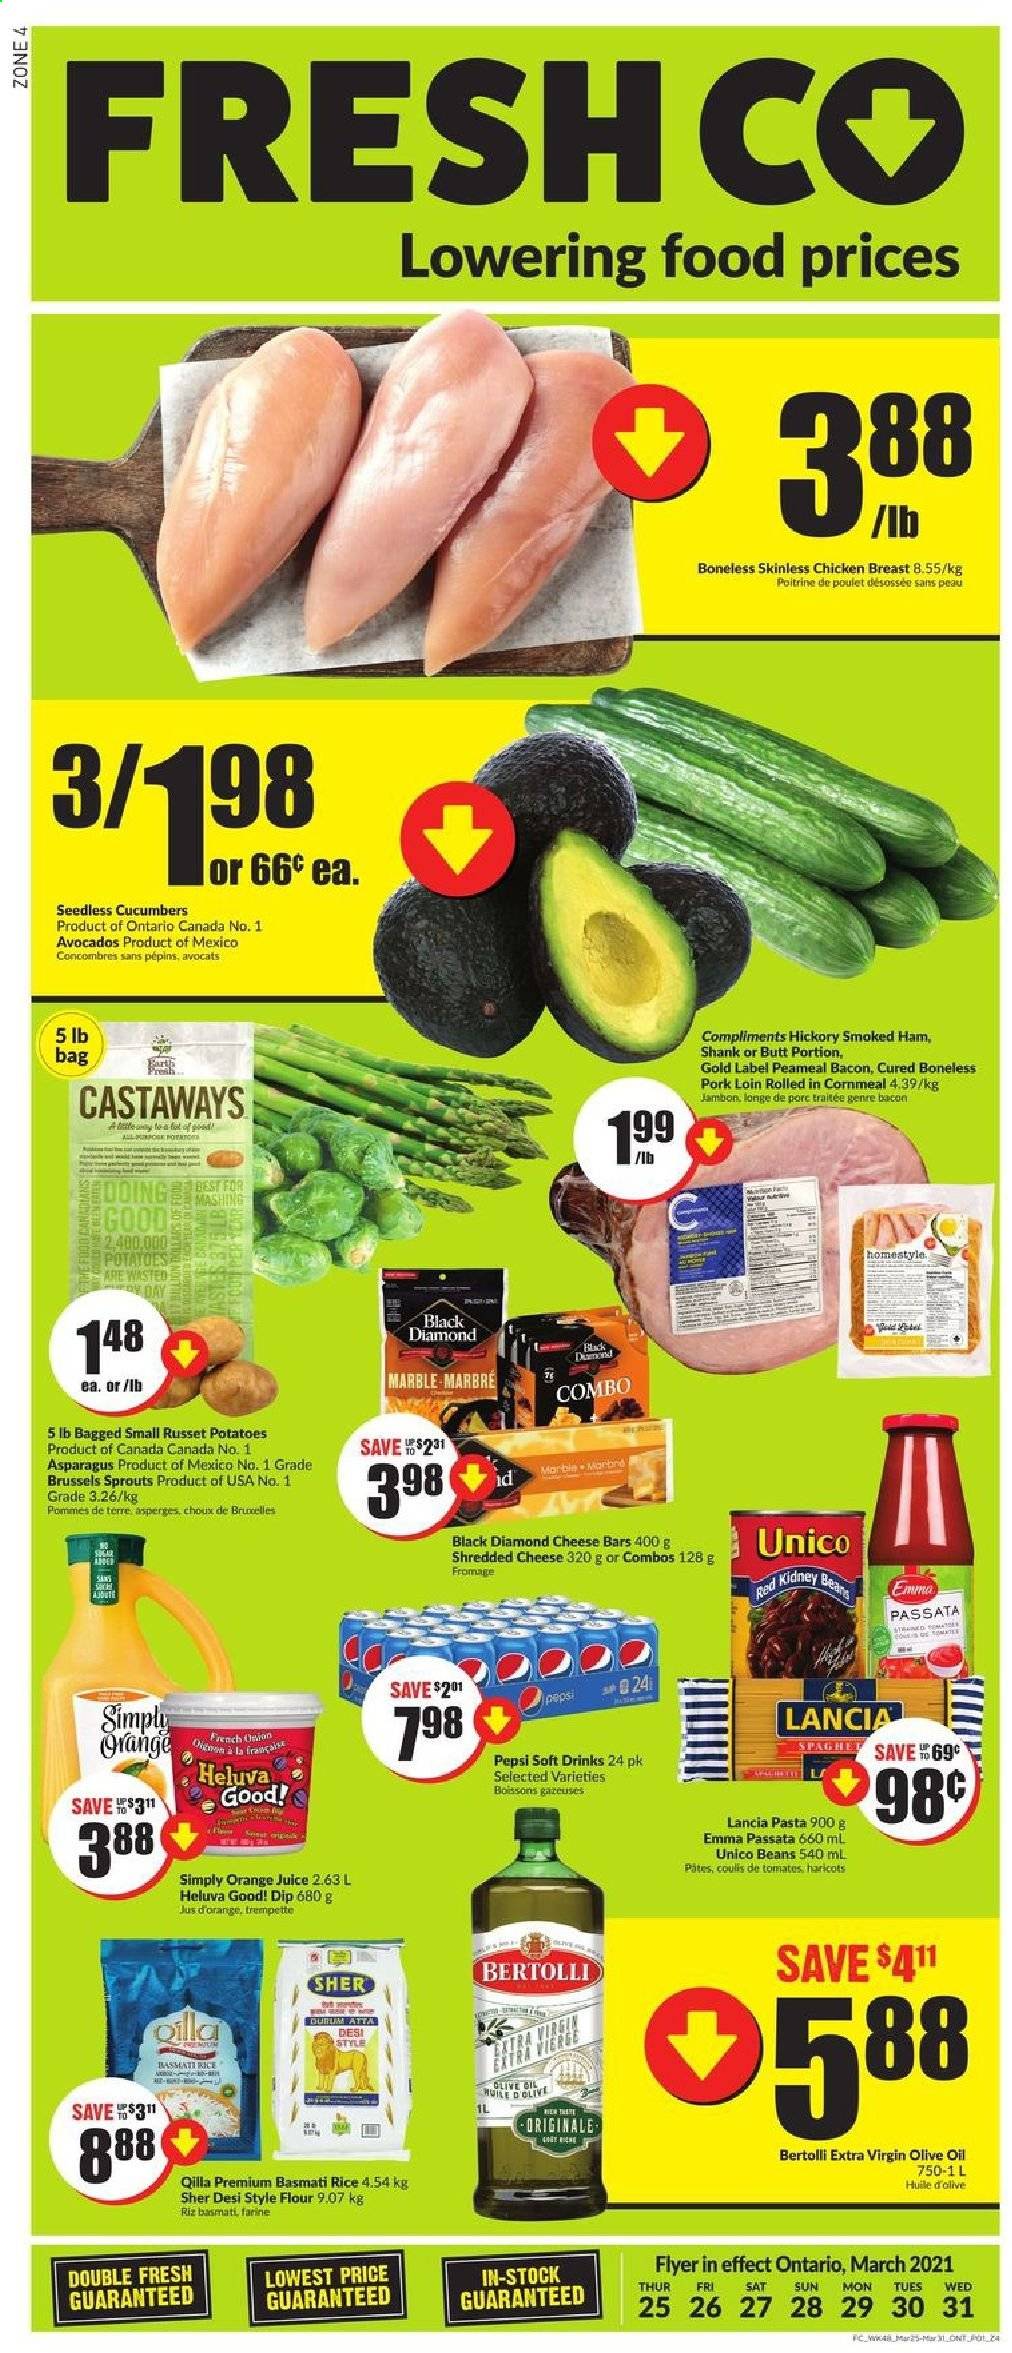 thumbnail - FreshCo. Flyer - March 25, 2021 - March 31, 2021 - Sales products - asparagus, beans, cucumber, russet potatoes, potatoes, brussel sprouts, avocado, pasta, Bertolli, bacon, ham, smoked ham, shredded cheese, dip, flour, basmati rice, rice, extra virgin olive oil, olive oil, oil, Pepsi, orange juice, juice, soft drink, chicken breasts, chicken, pork loin, pork meat. Page 1.